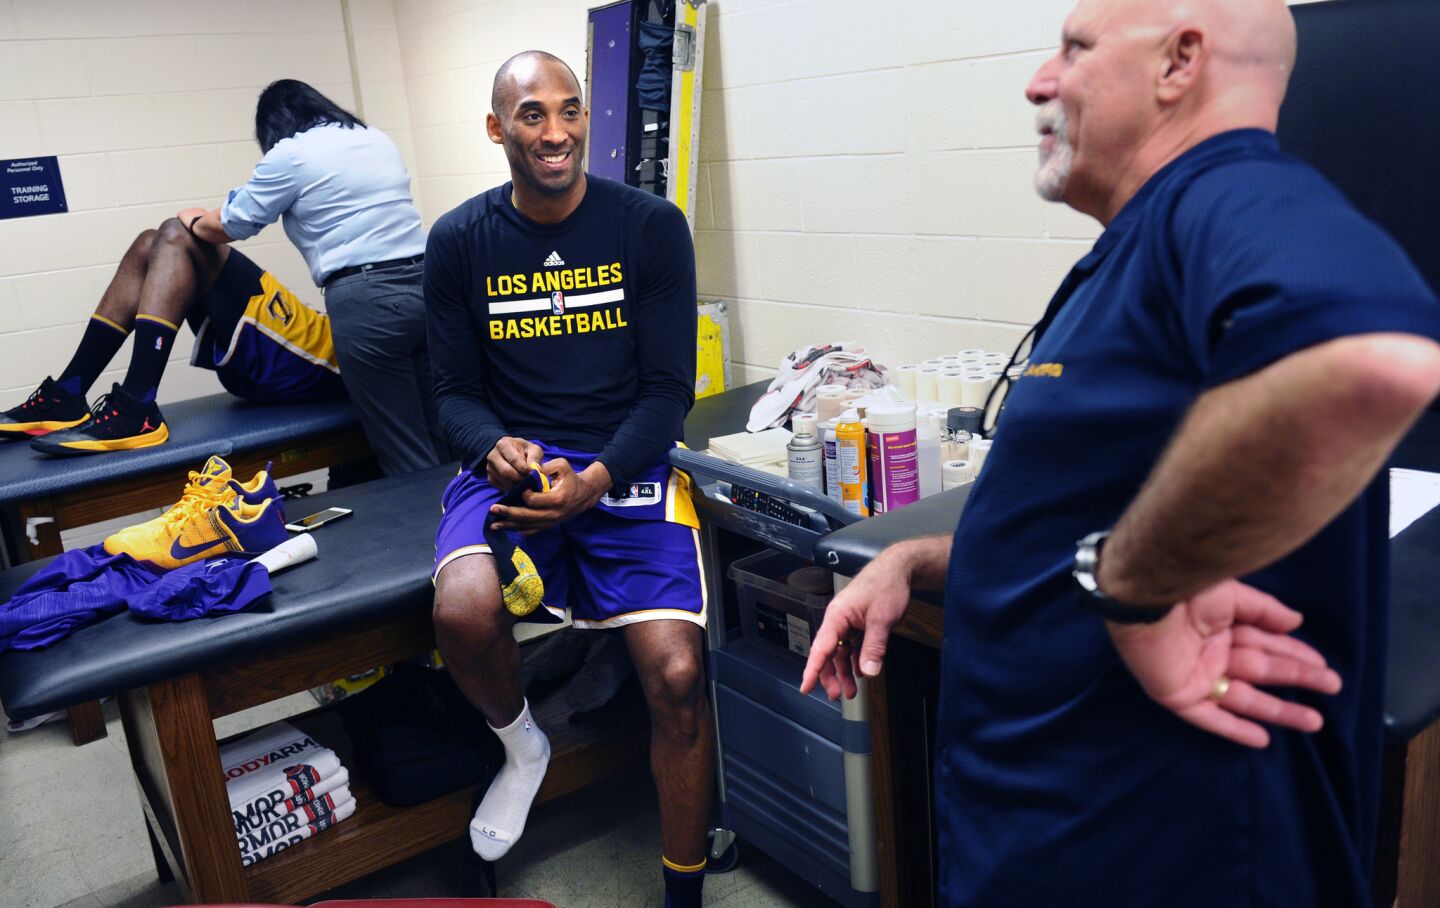 Kobe Bryant and trainer Gary Vitti share a laugh in the locker room before a game against the Rockets in Houston.